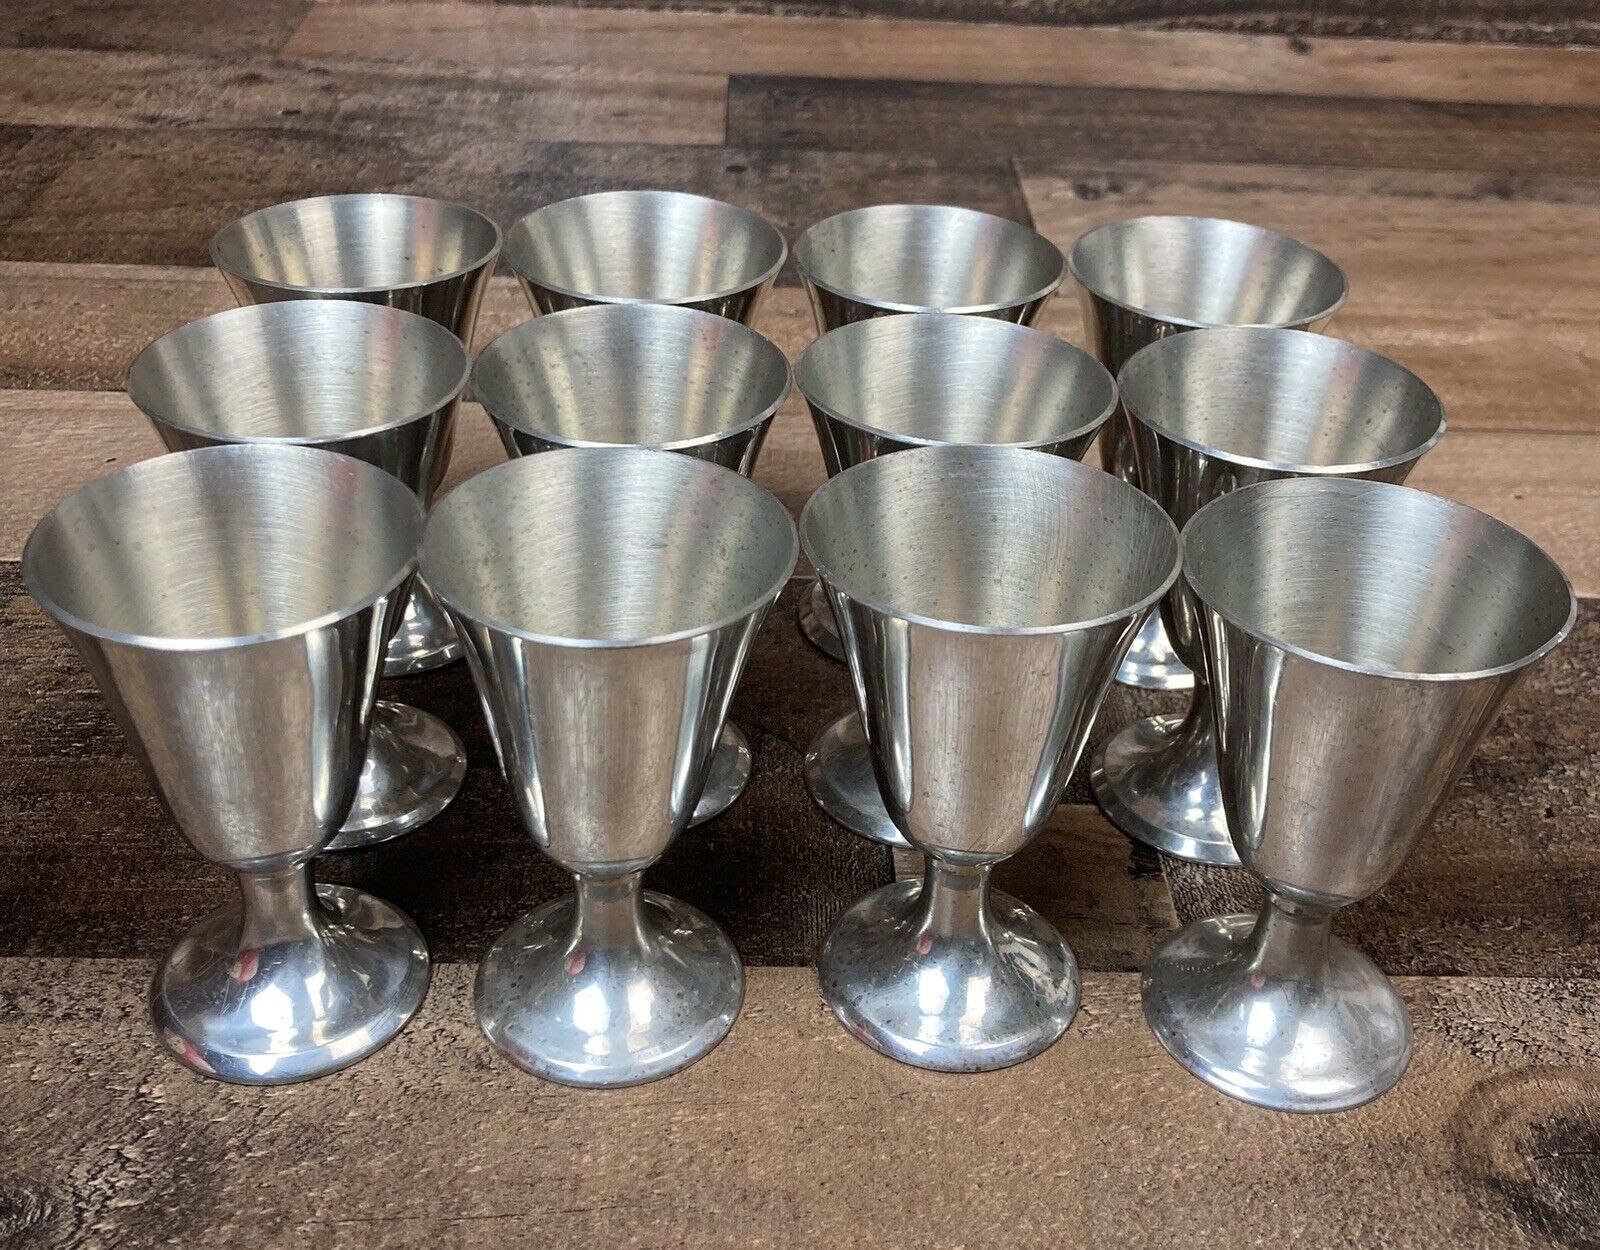 Stieff Pewter Hollowware Goblets P57 4” Vintage -Lot of 12